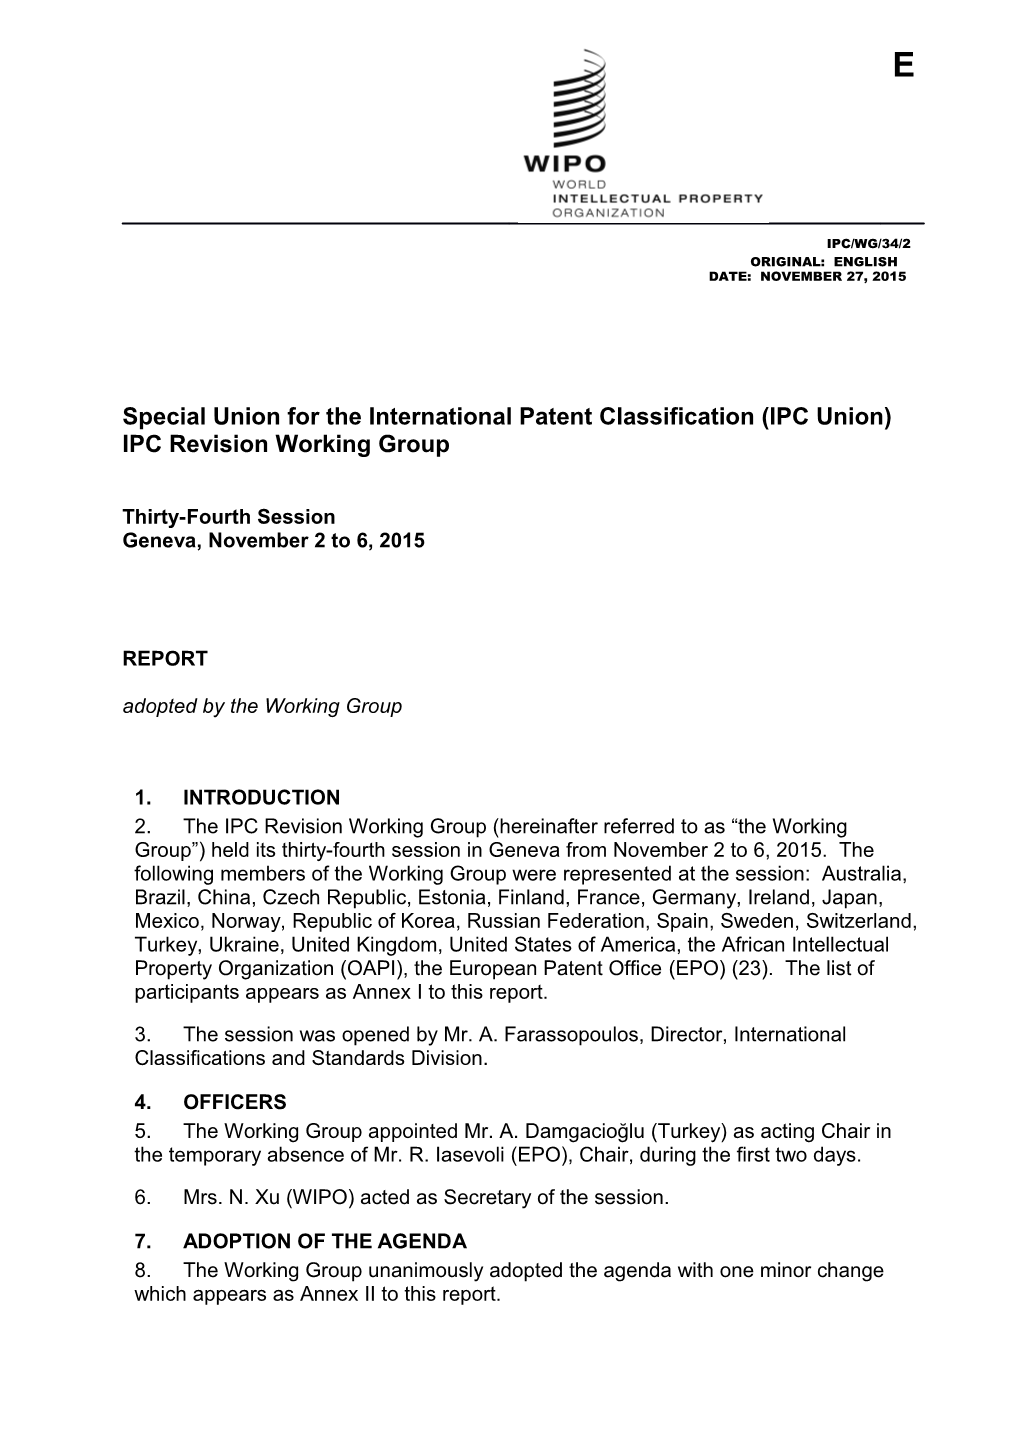 Document IPC/WG/34/2, Report, 34Th Session IPC Revision Working Group